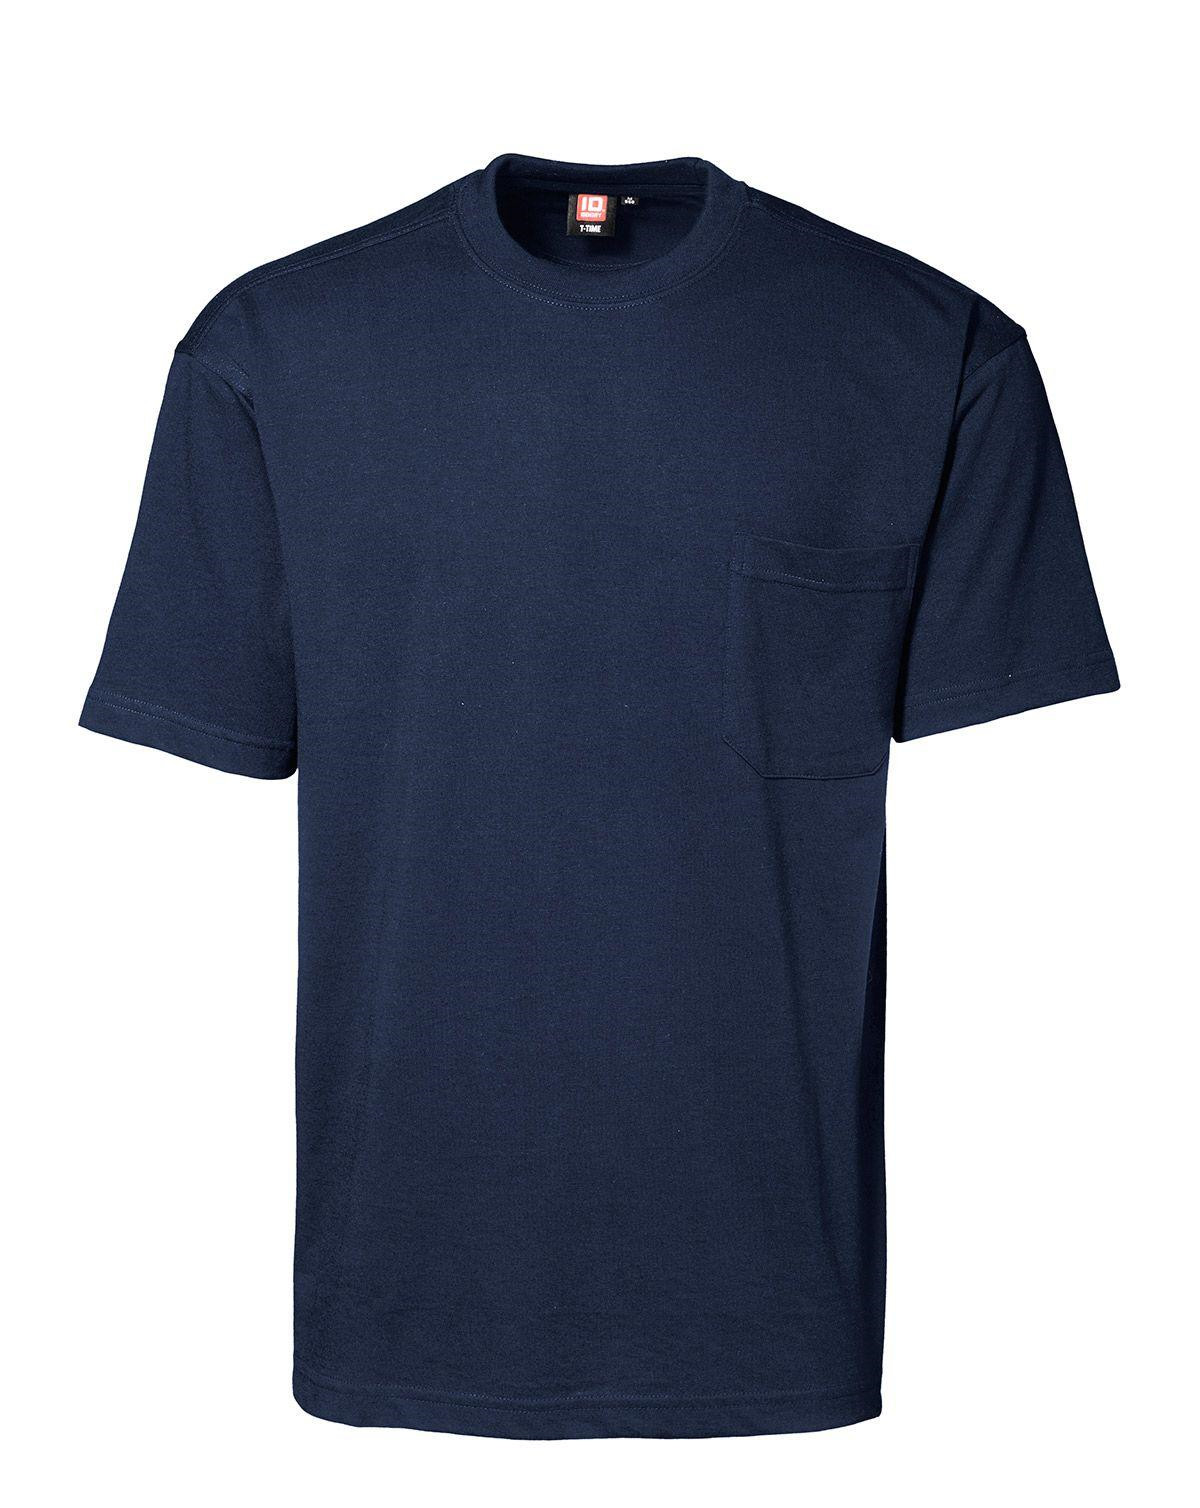 #3 - ID T-TIME T-shirt m. Brystlomme (Navy, M)